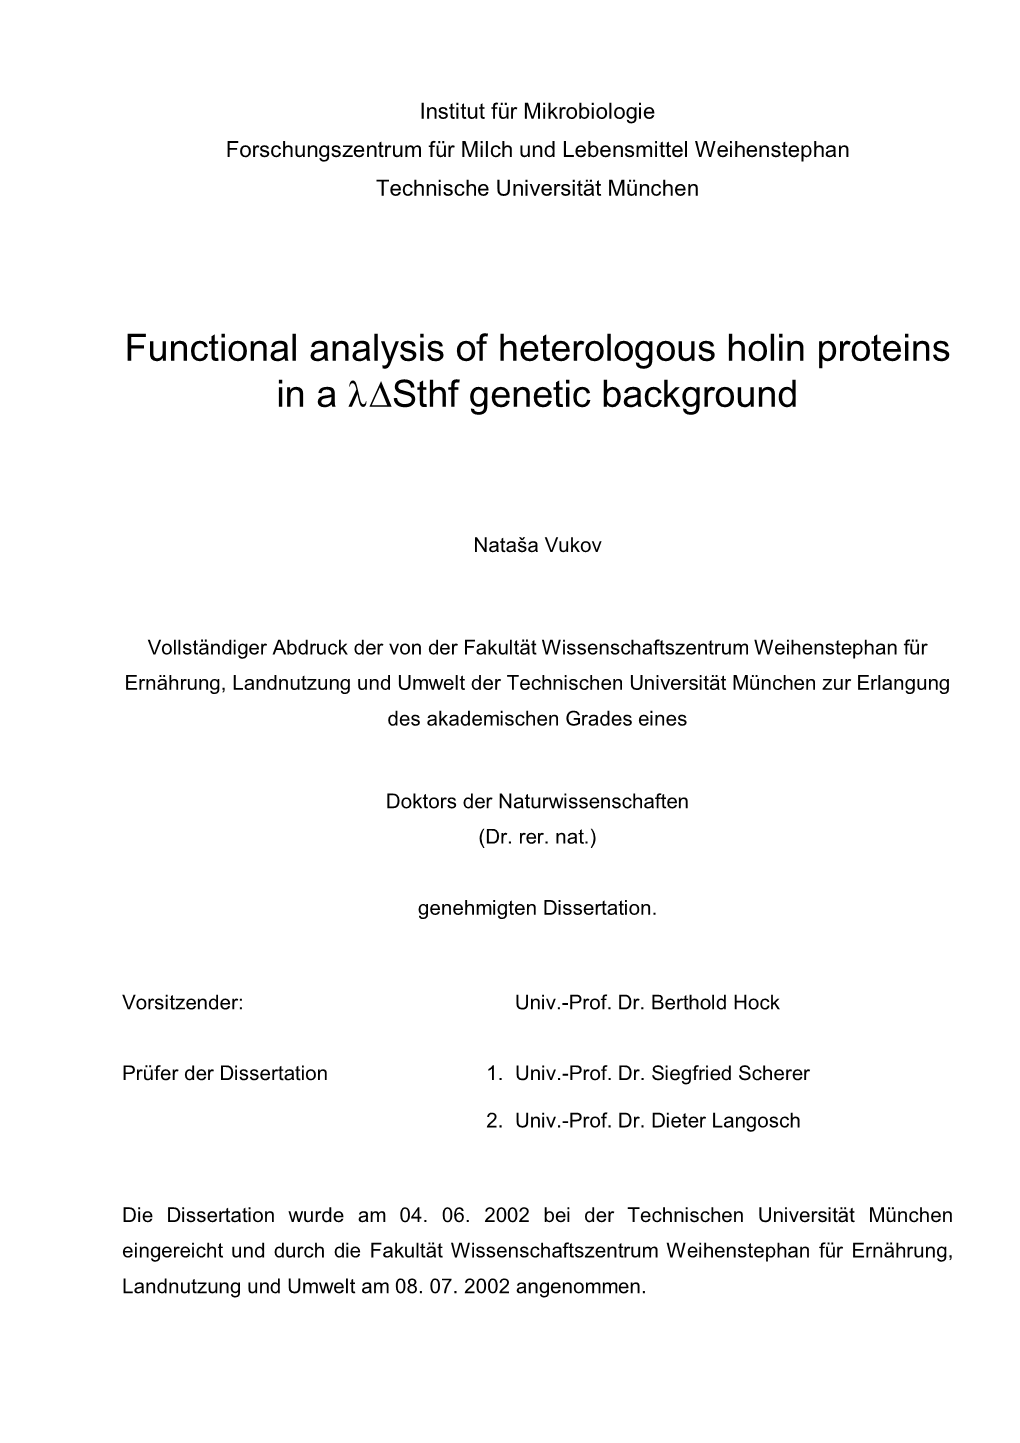 Functional Analysis of Heterologous Holin Proteins in a Λ∆Sthf Genetic Background